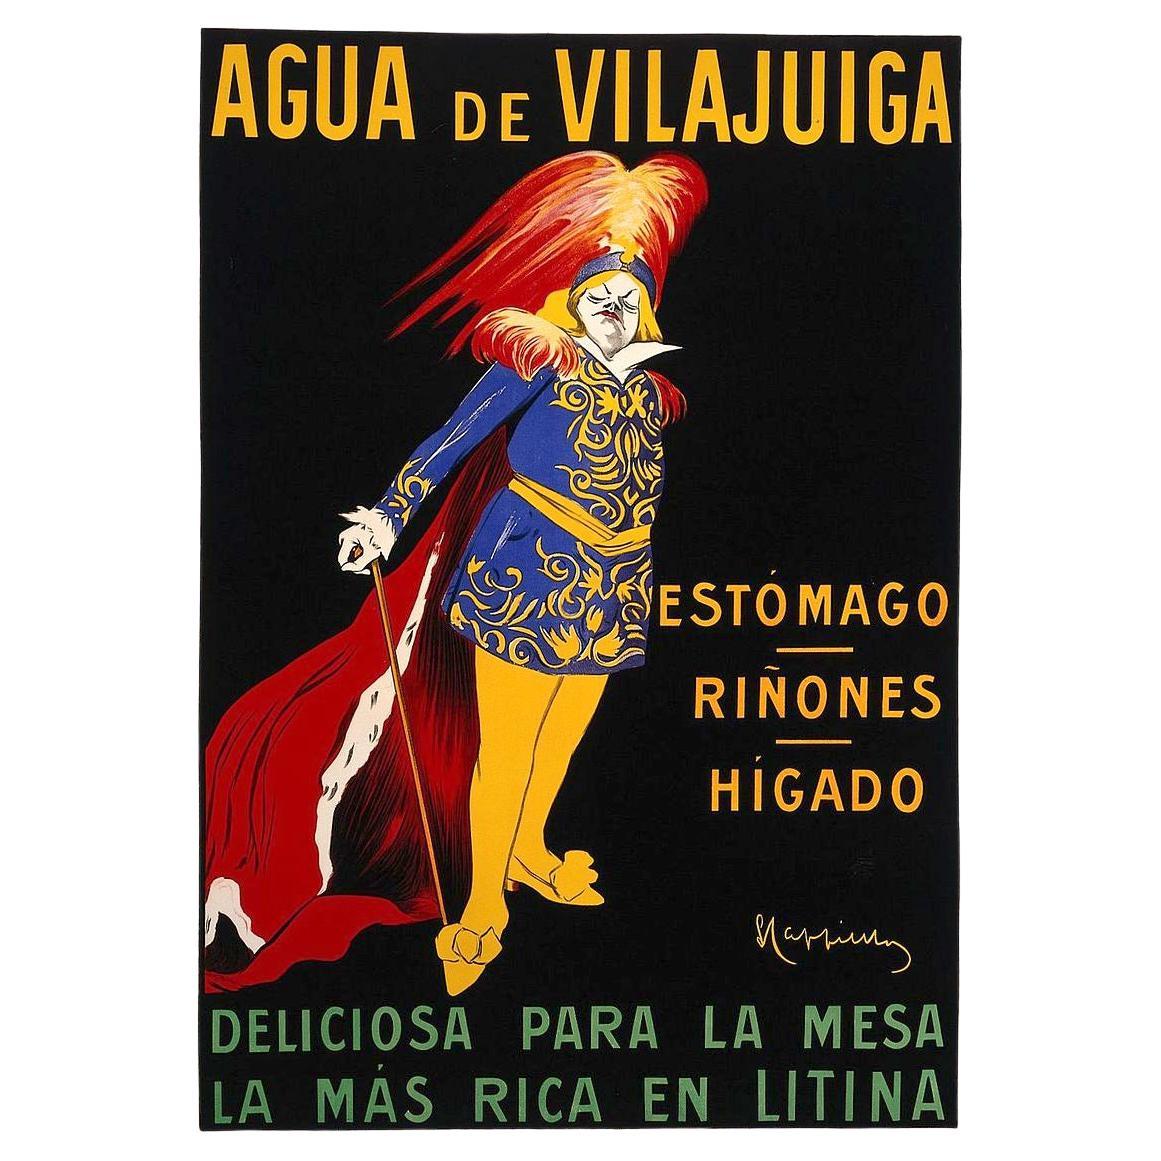 Early 20th Century Advertising Poster by Leonetto Cappiello